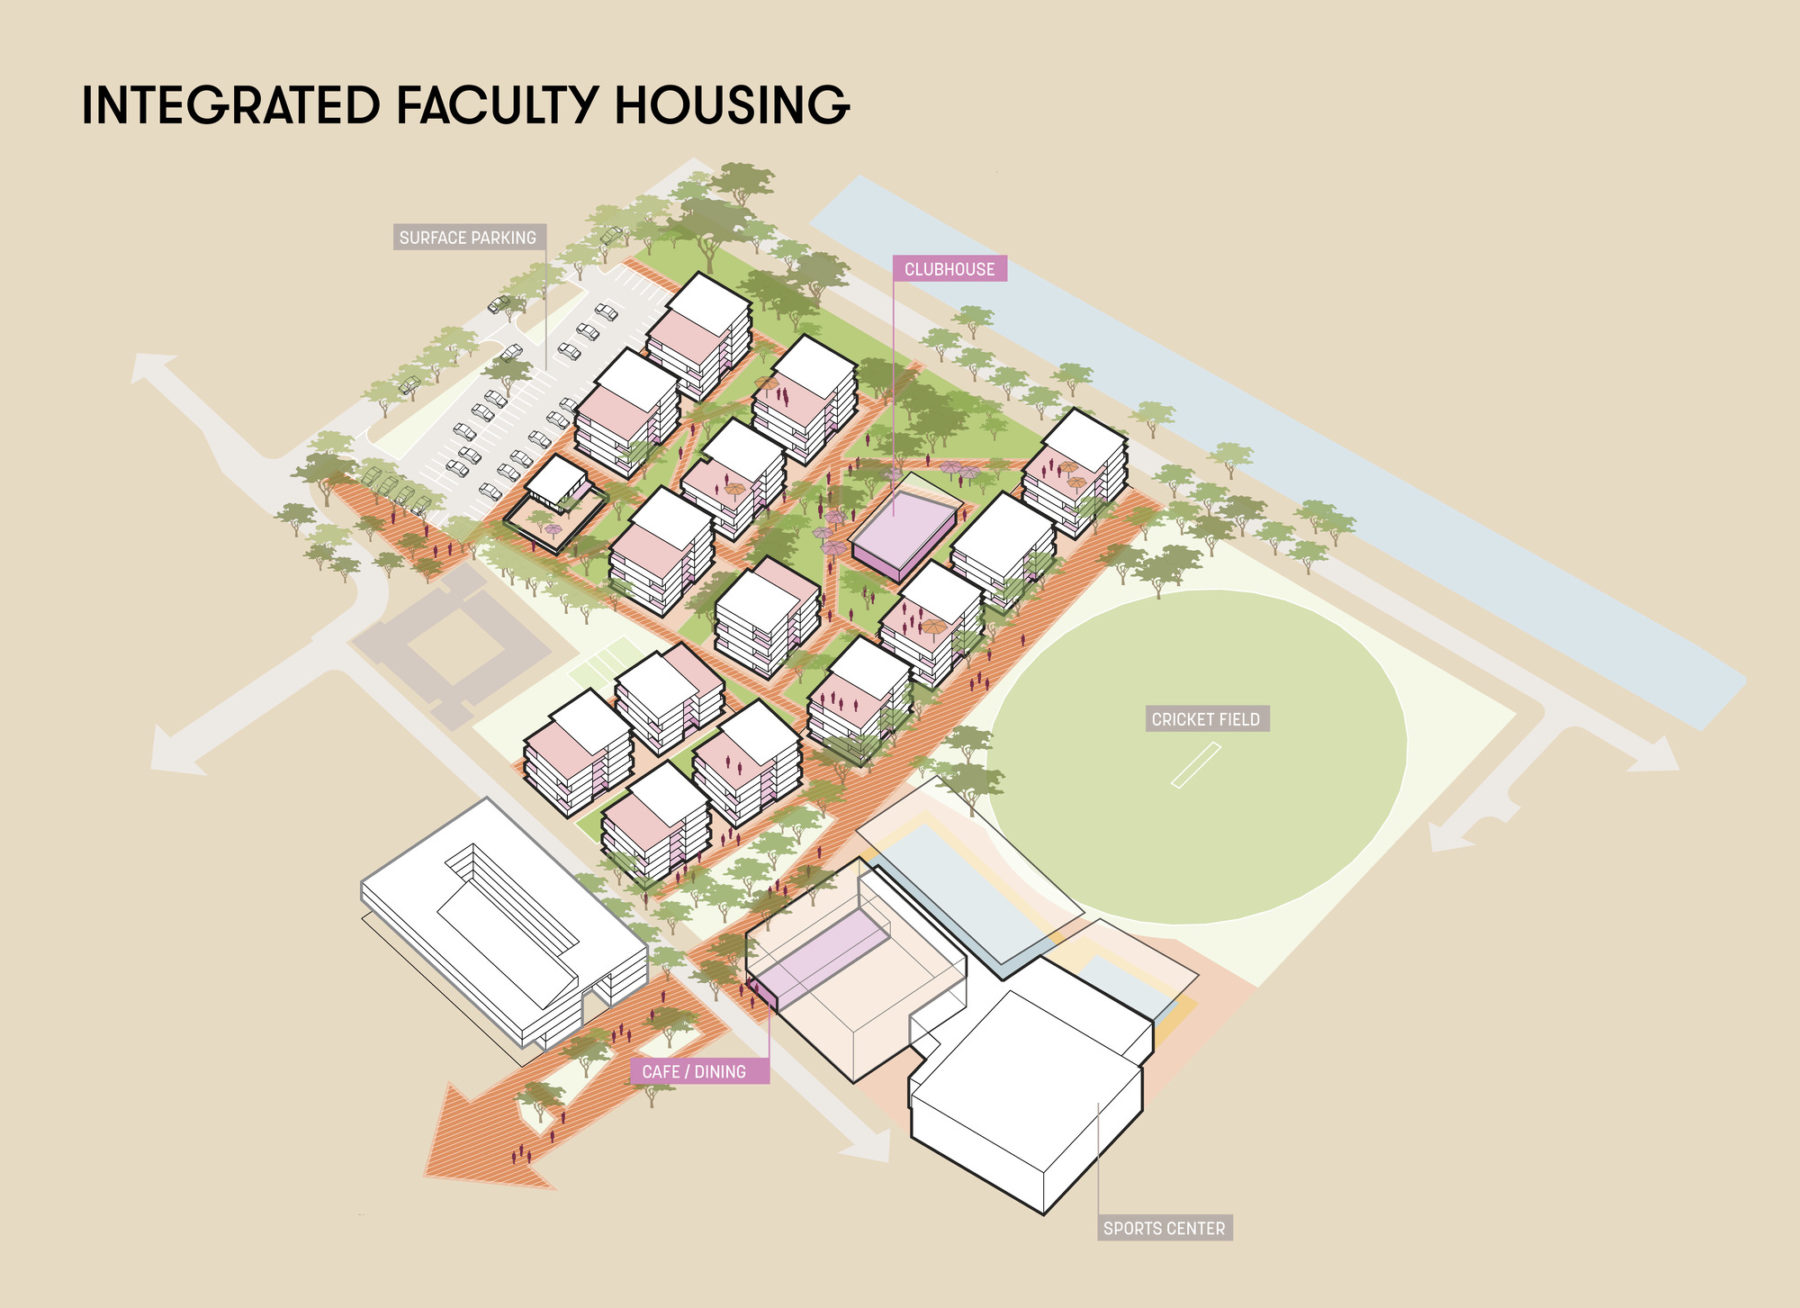 Integrated faculty housing diagram